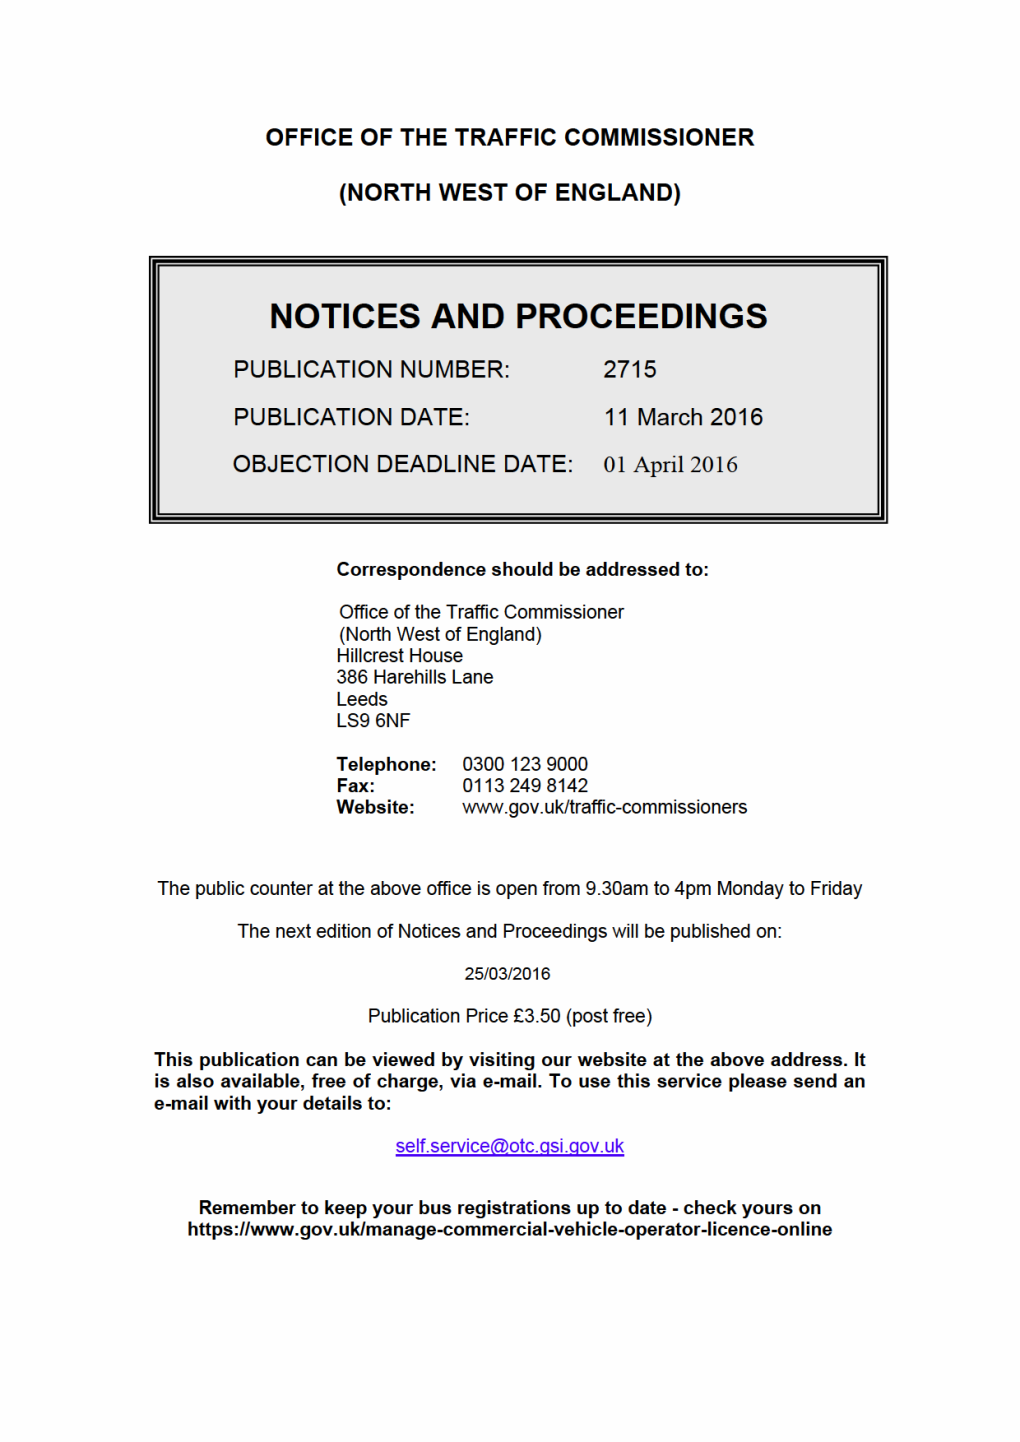 NOTICES and PROCEEDINGS 11 March 2016